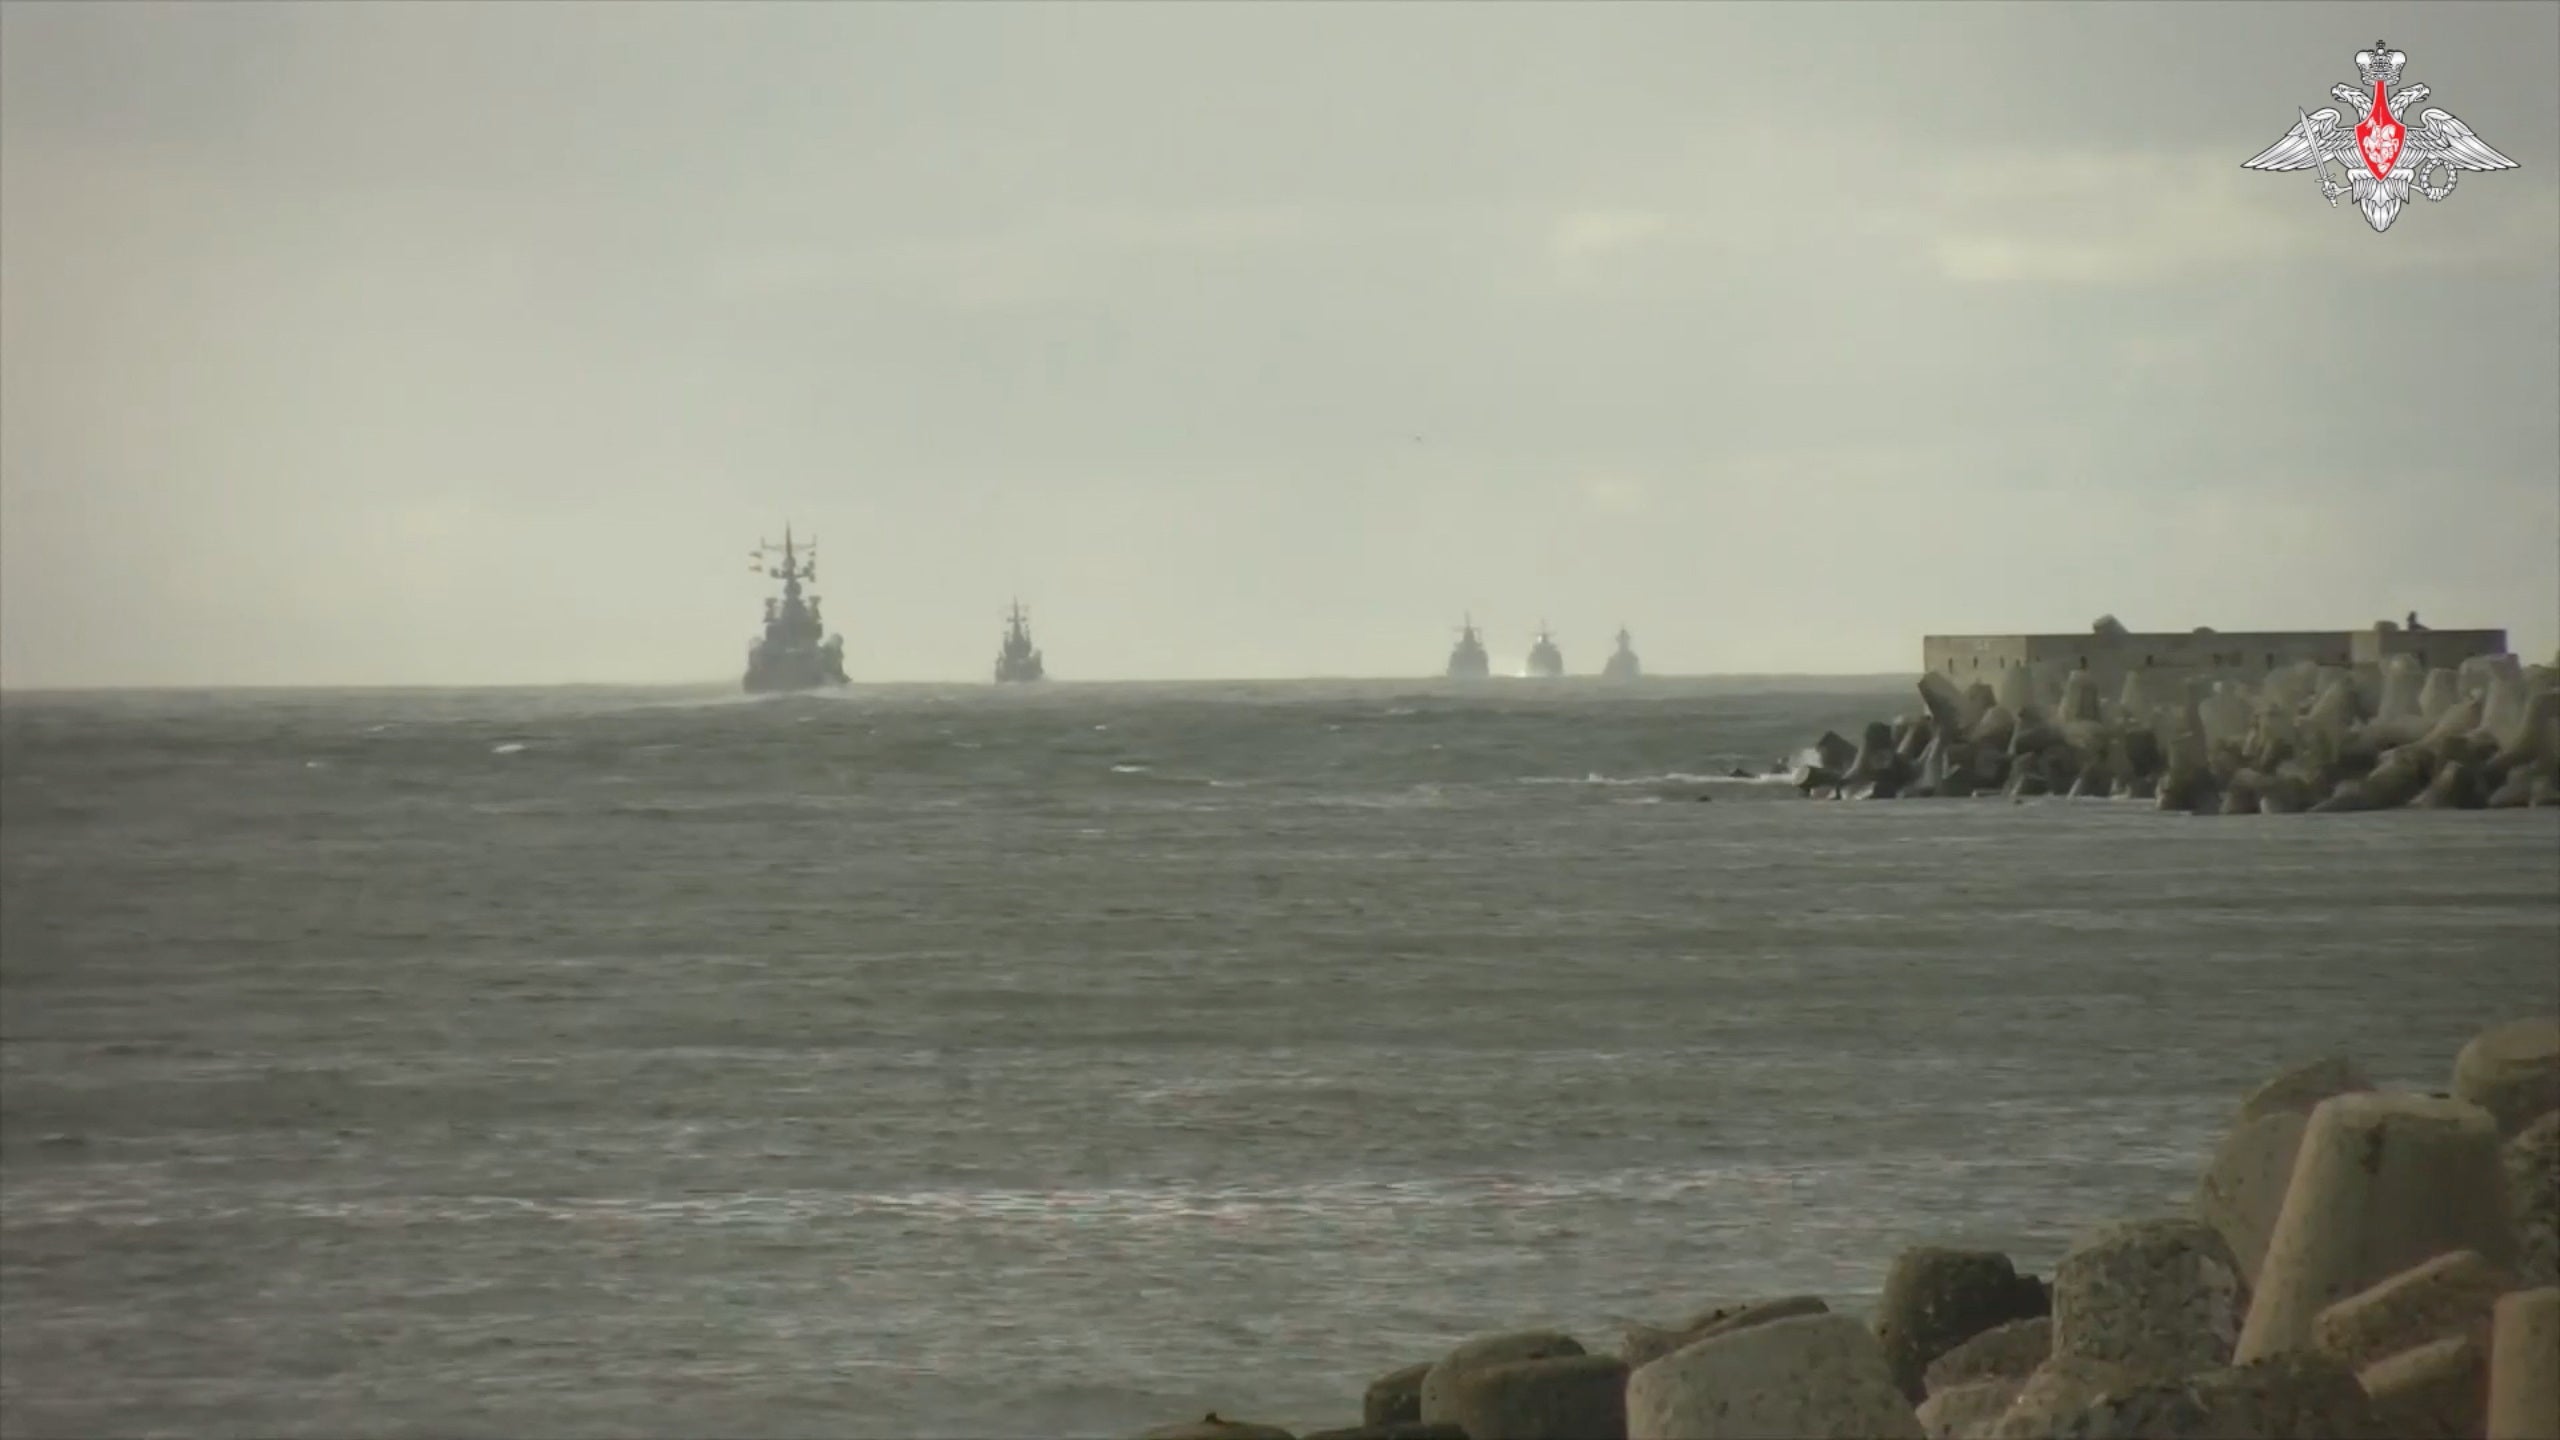 Russian warships take part in naval exercises in the Baltic Sea, in this still image taken from video released June 5, 2023